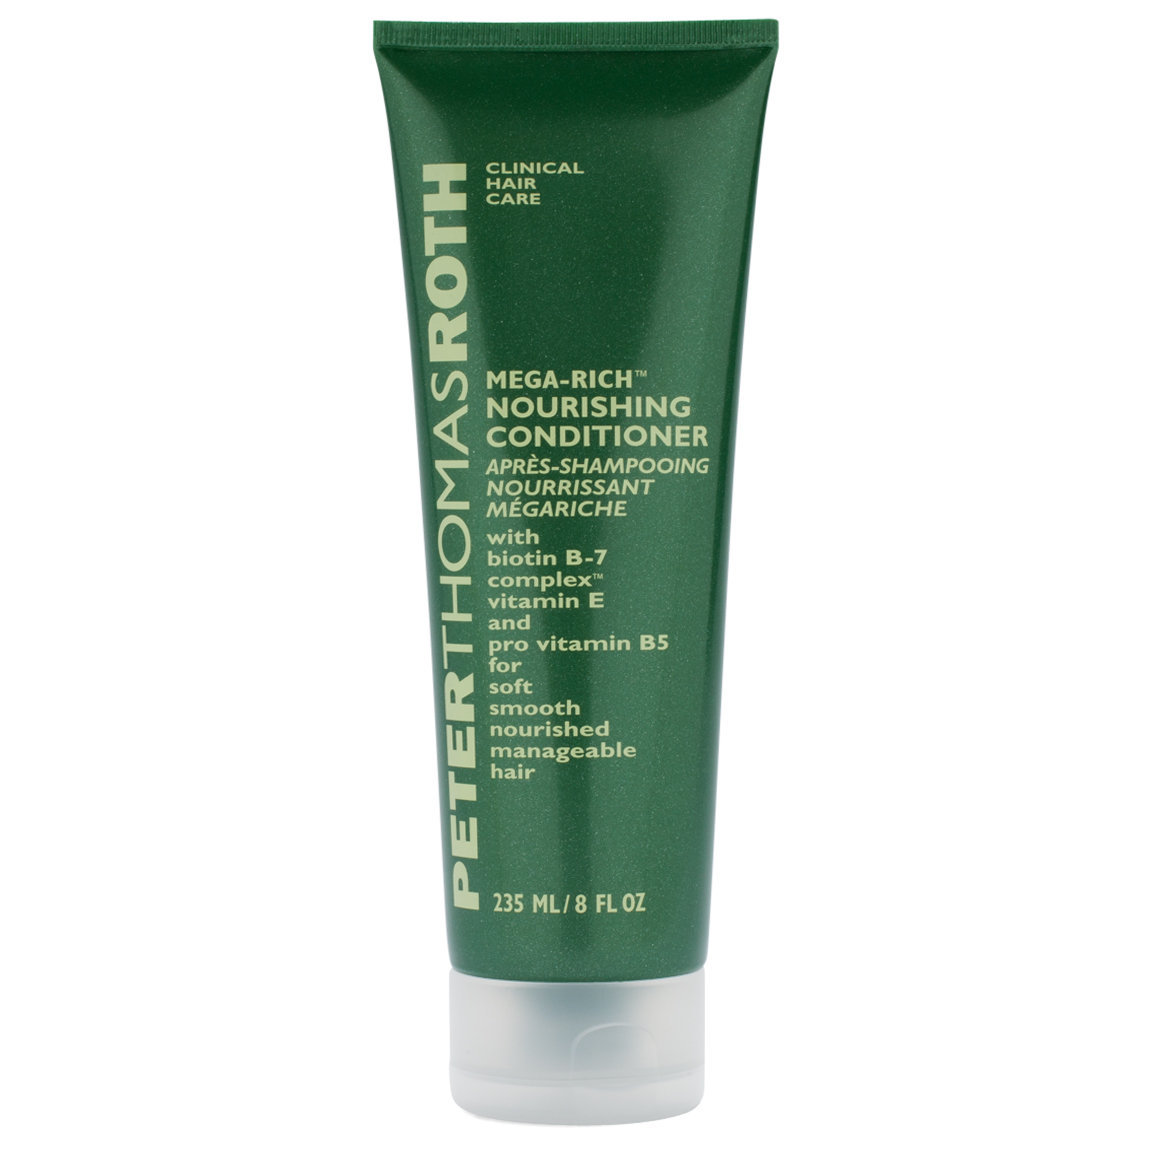 Peter Thomas Roth Mega-Rich Conditioner alternative view 1 - product swatch.